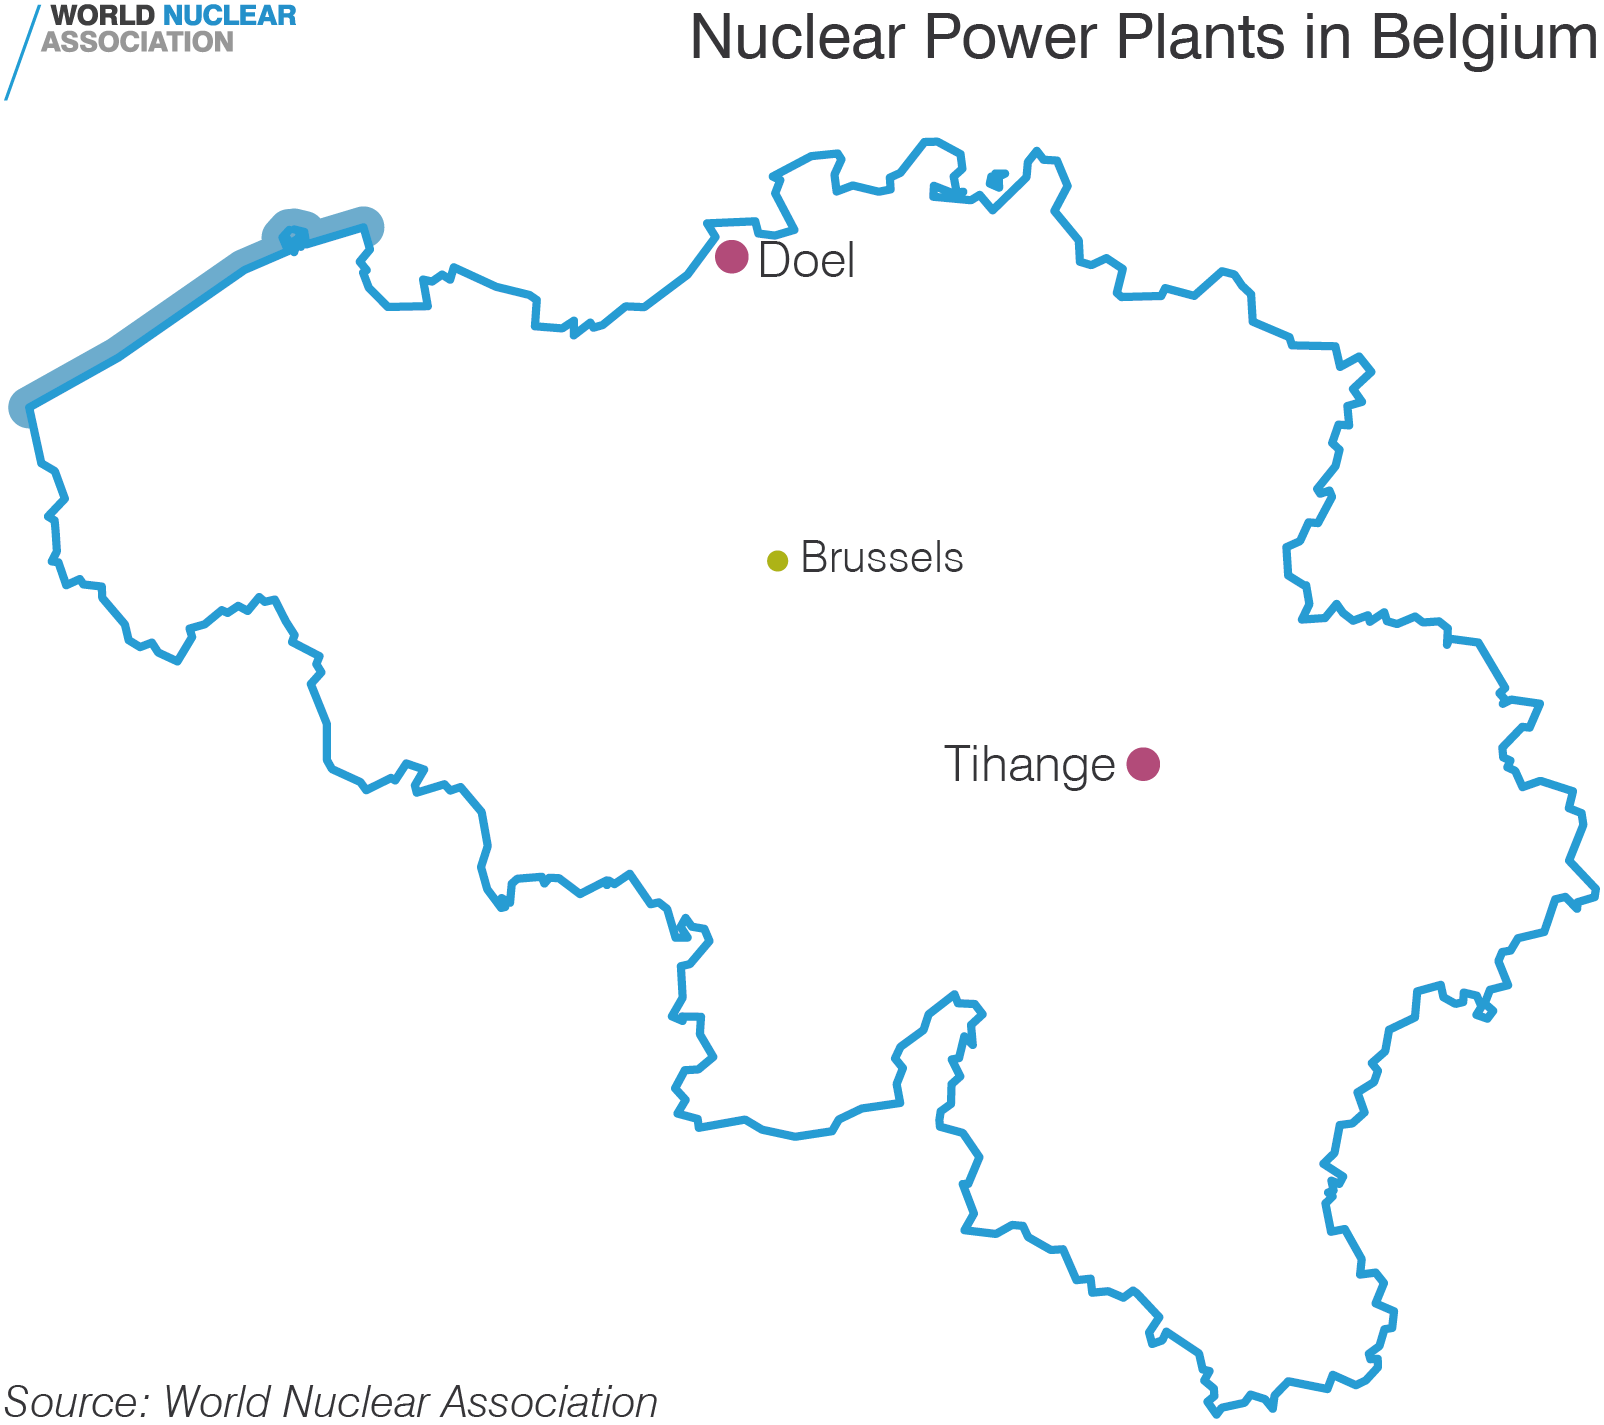 Nuclear Power Plants in Belgium